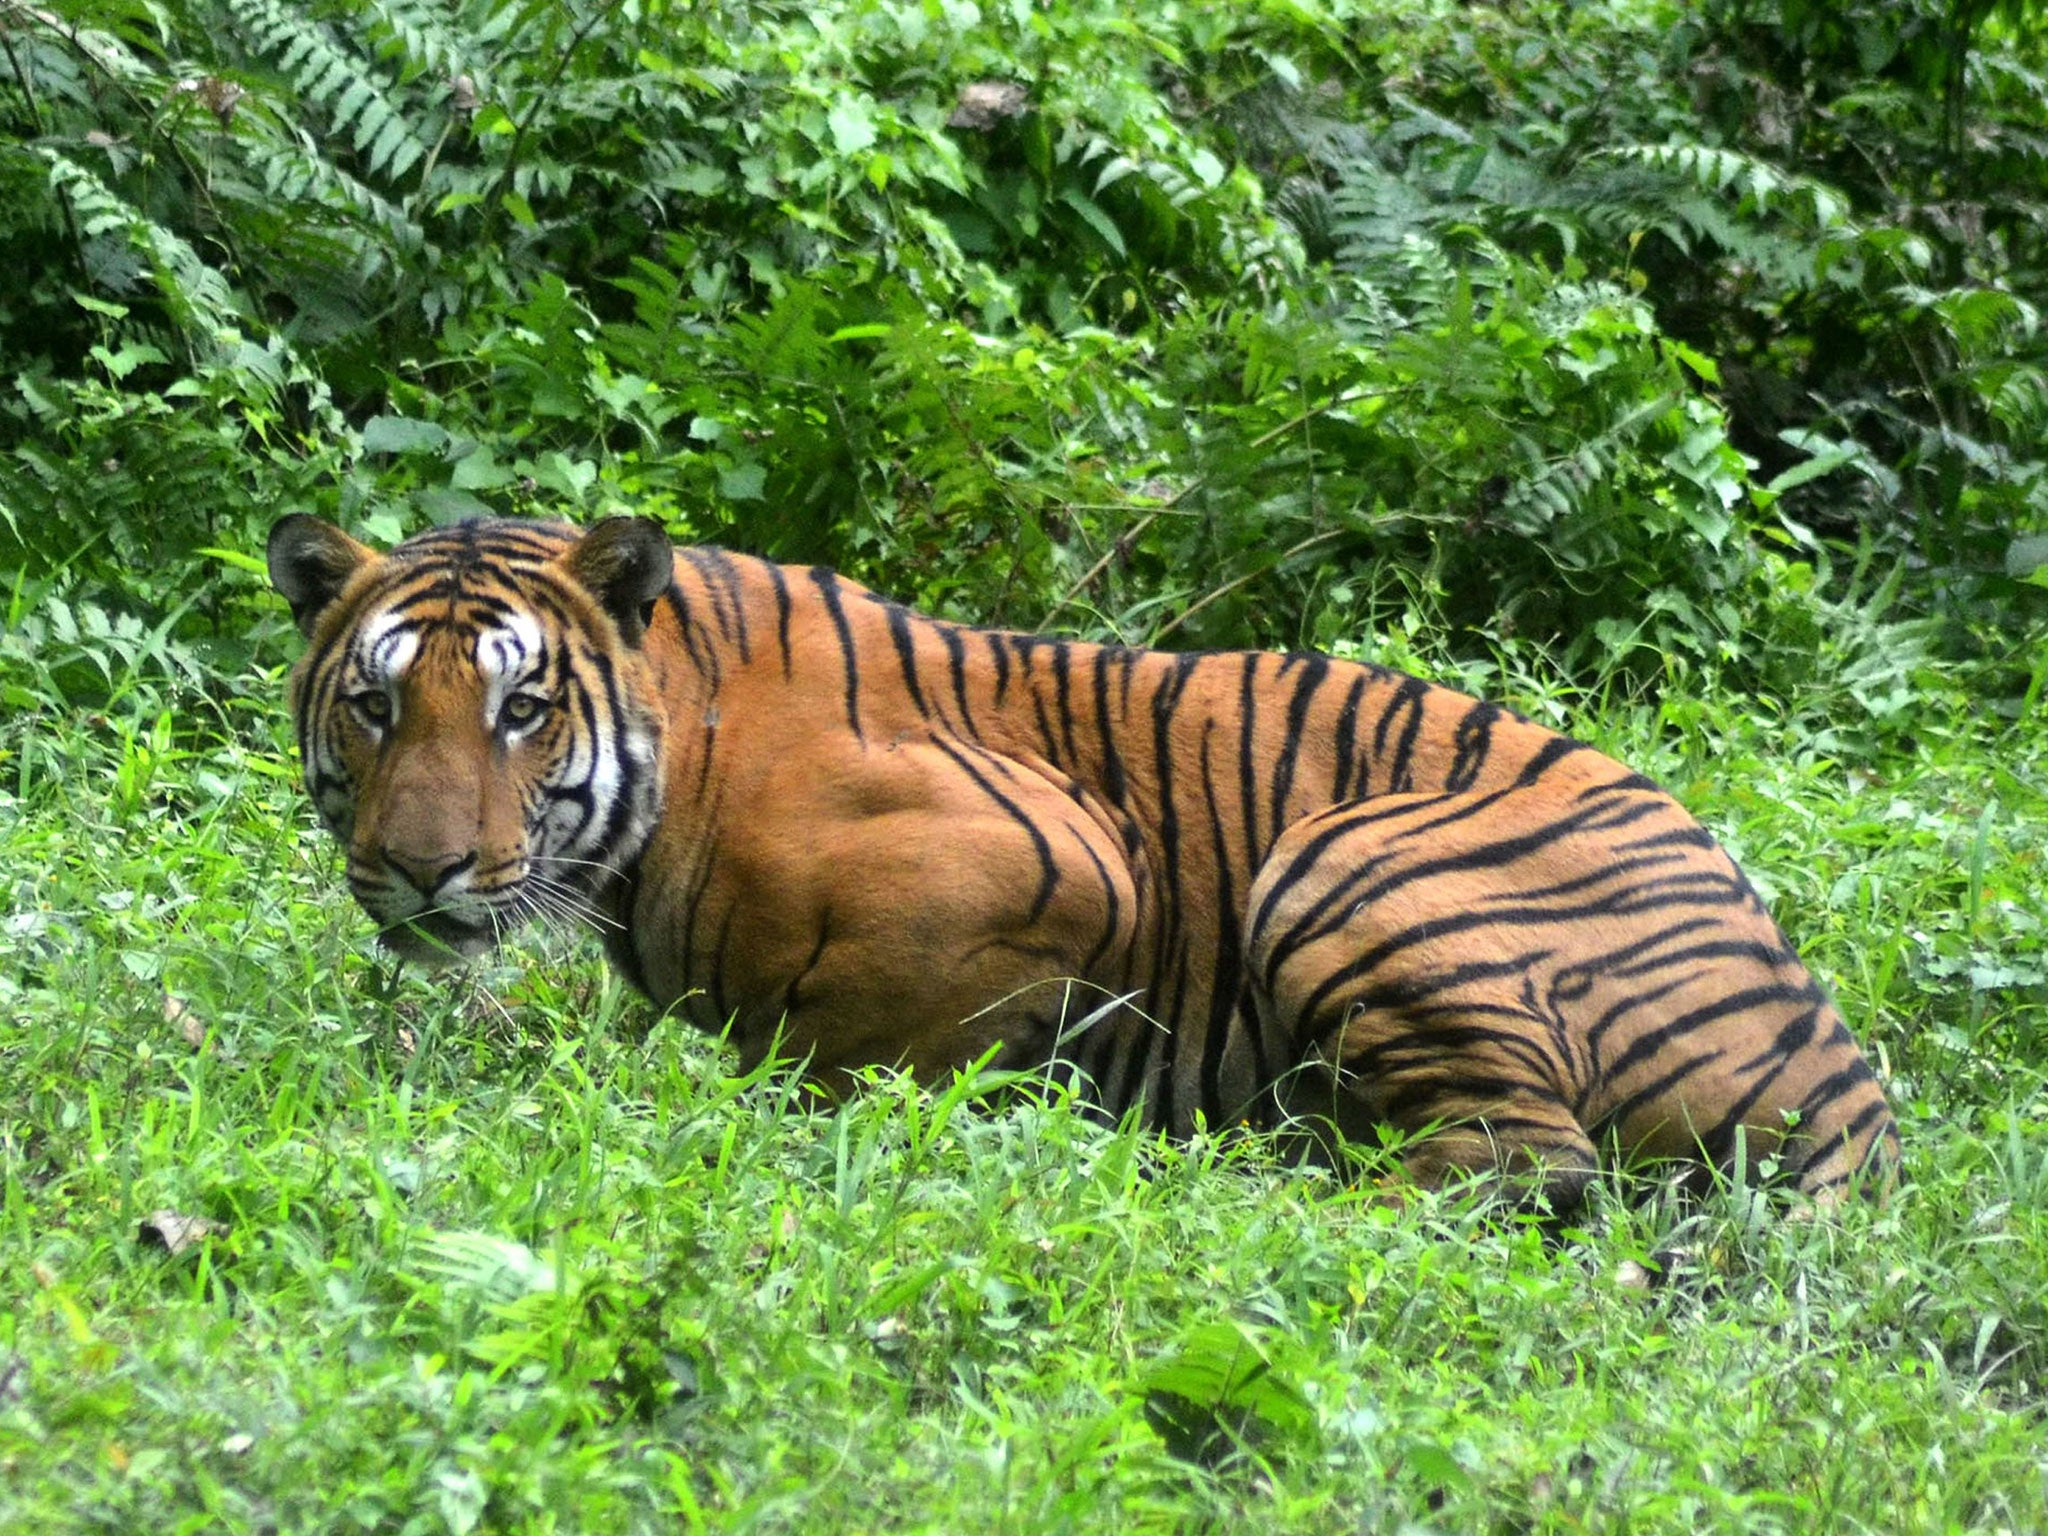 A century ago an estimated 100,000 tigers roamed India's forests